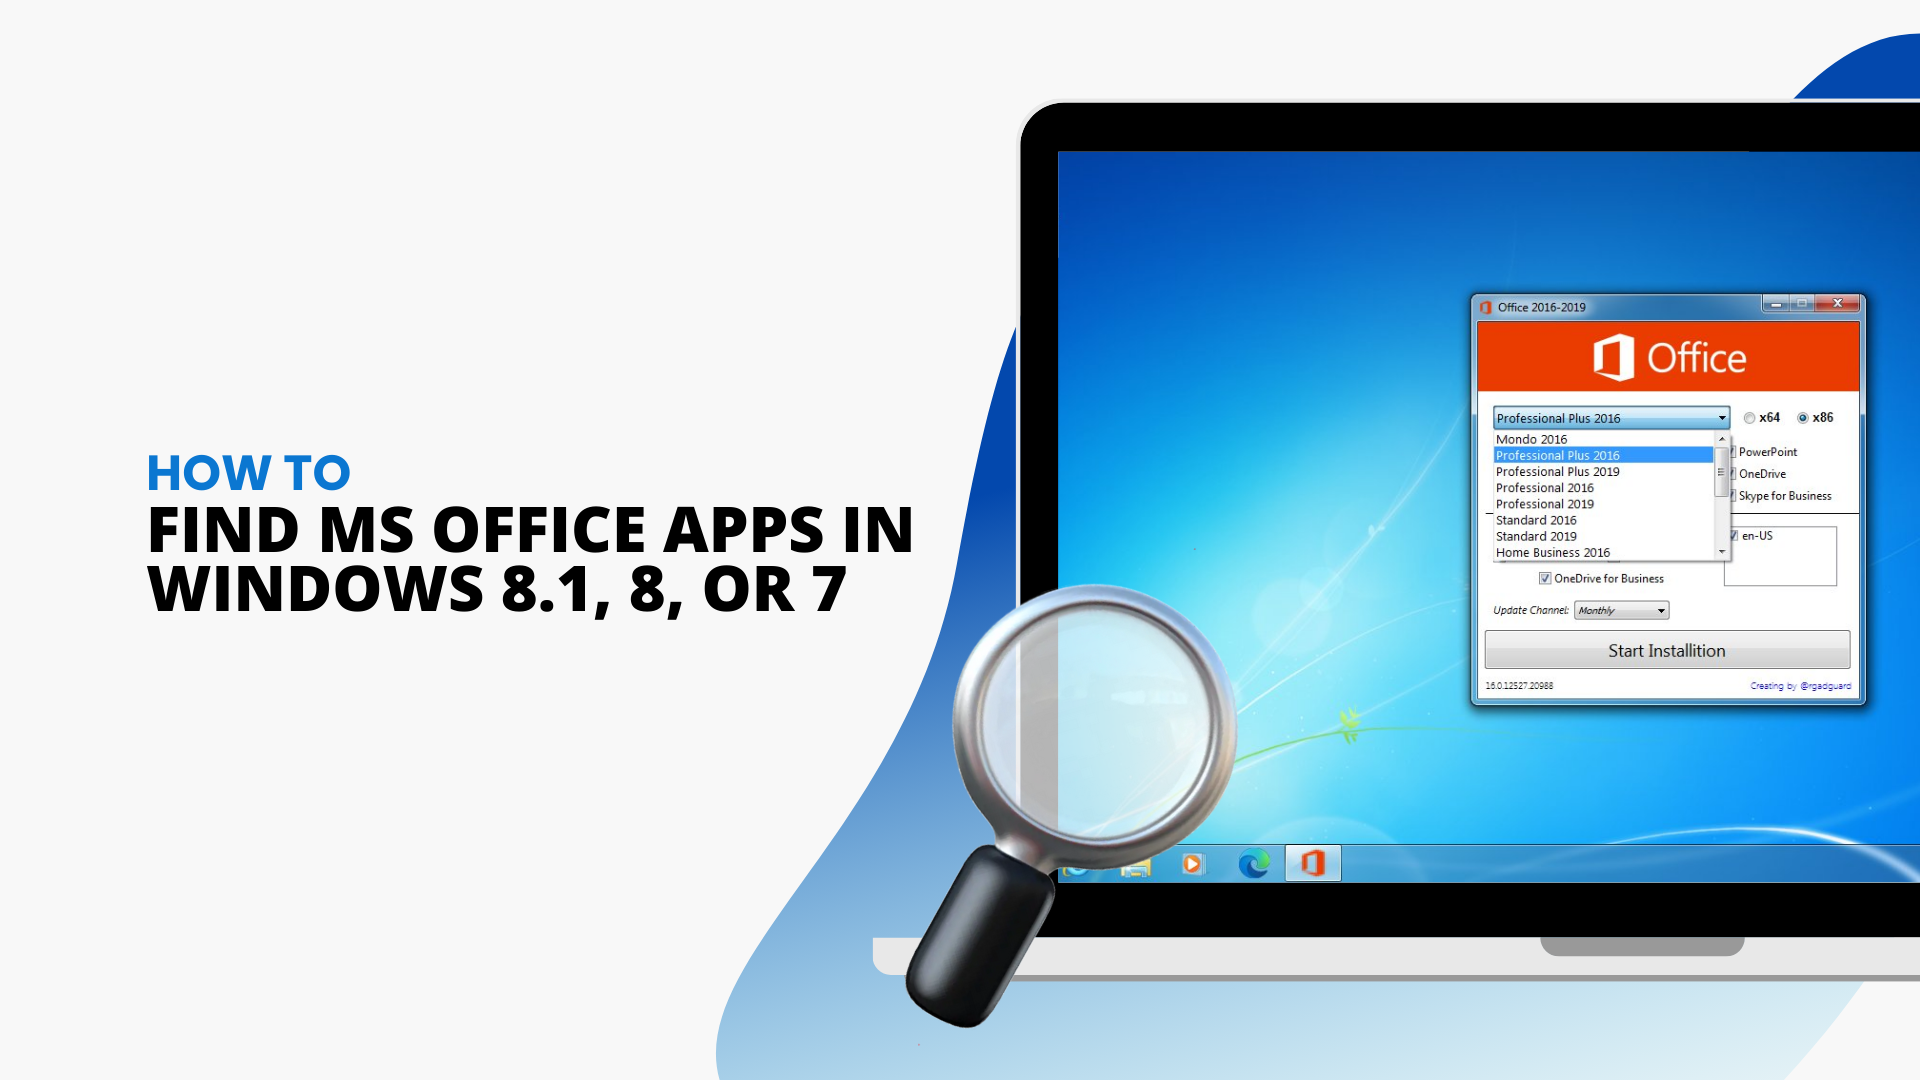 How To Find Microsoft Office Applications on Windows 8.1, 8, or 7